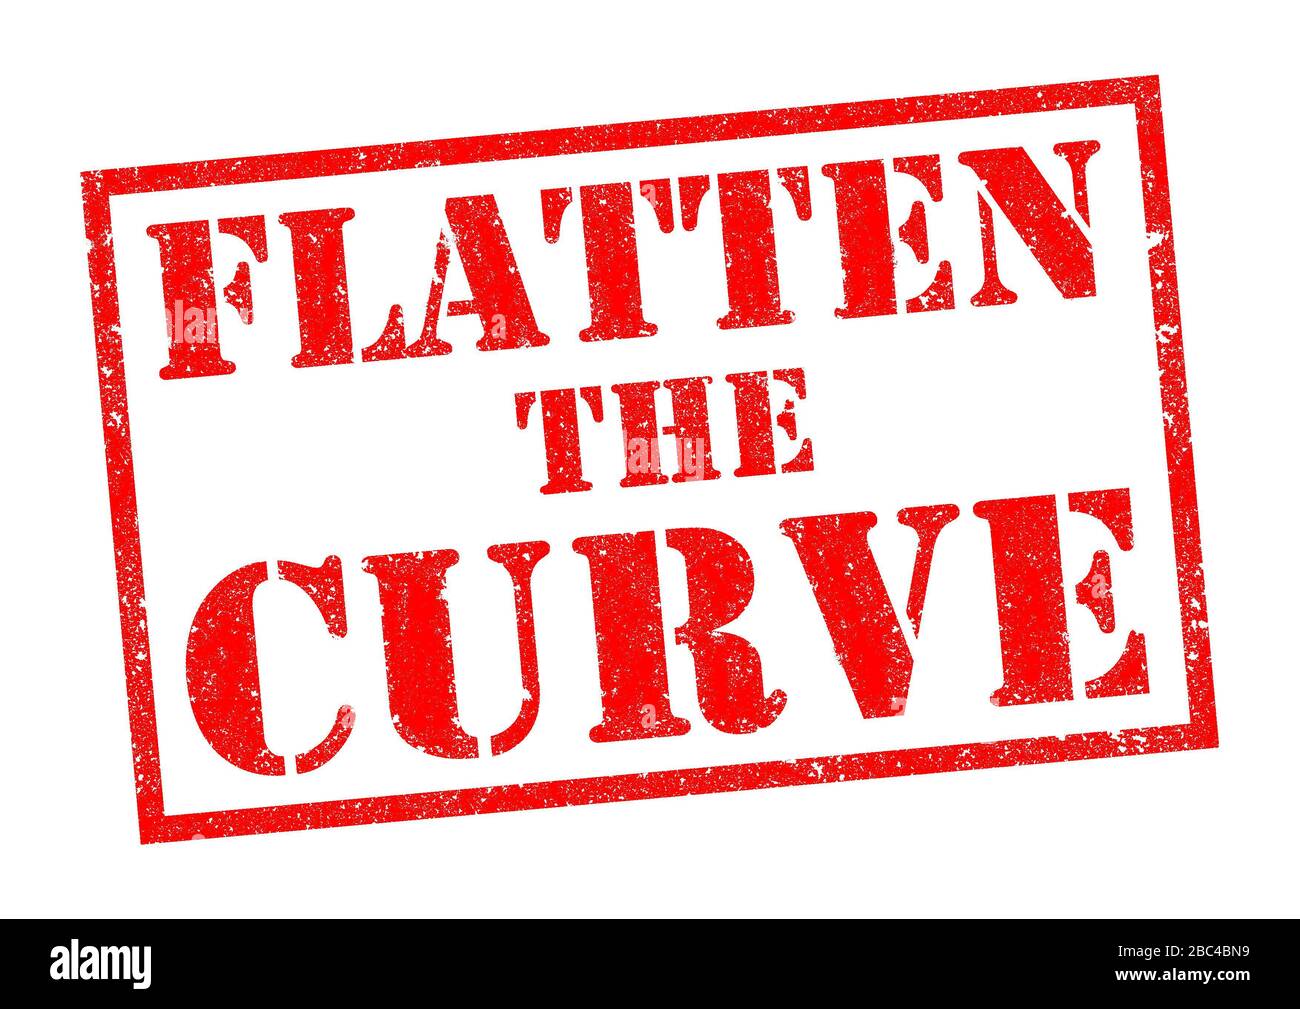 FLATTEN THE CURVE red Rubber Stamp over a white background. Stock Photo